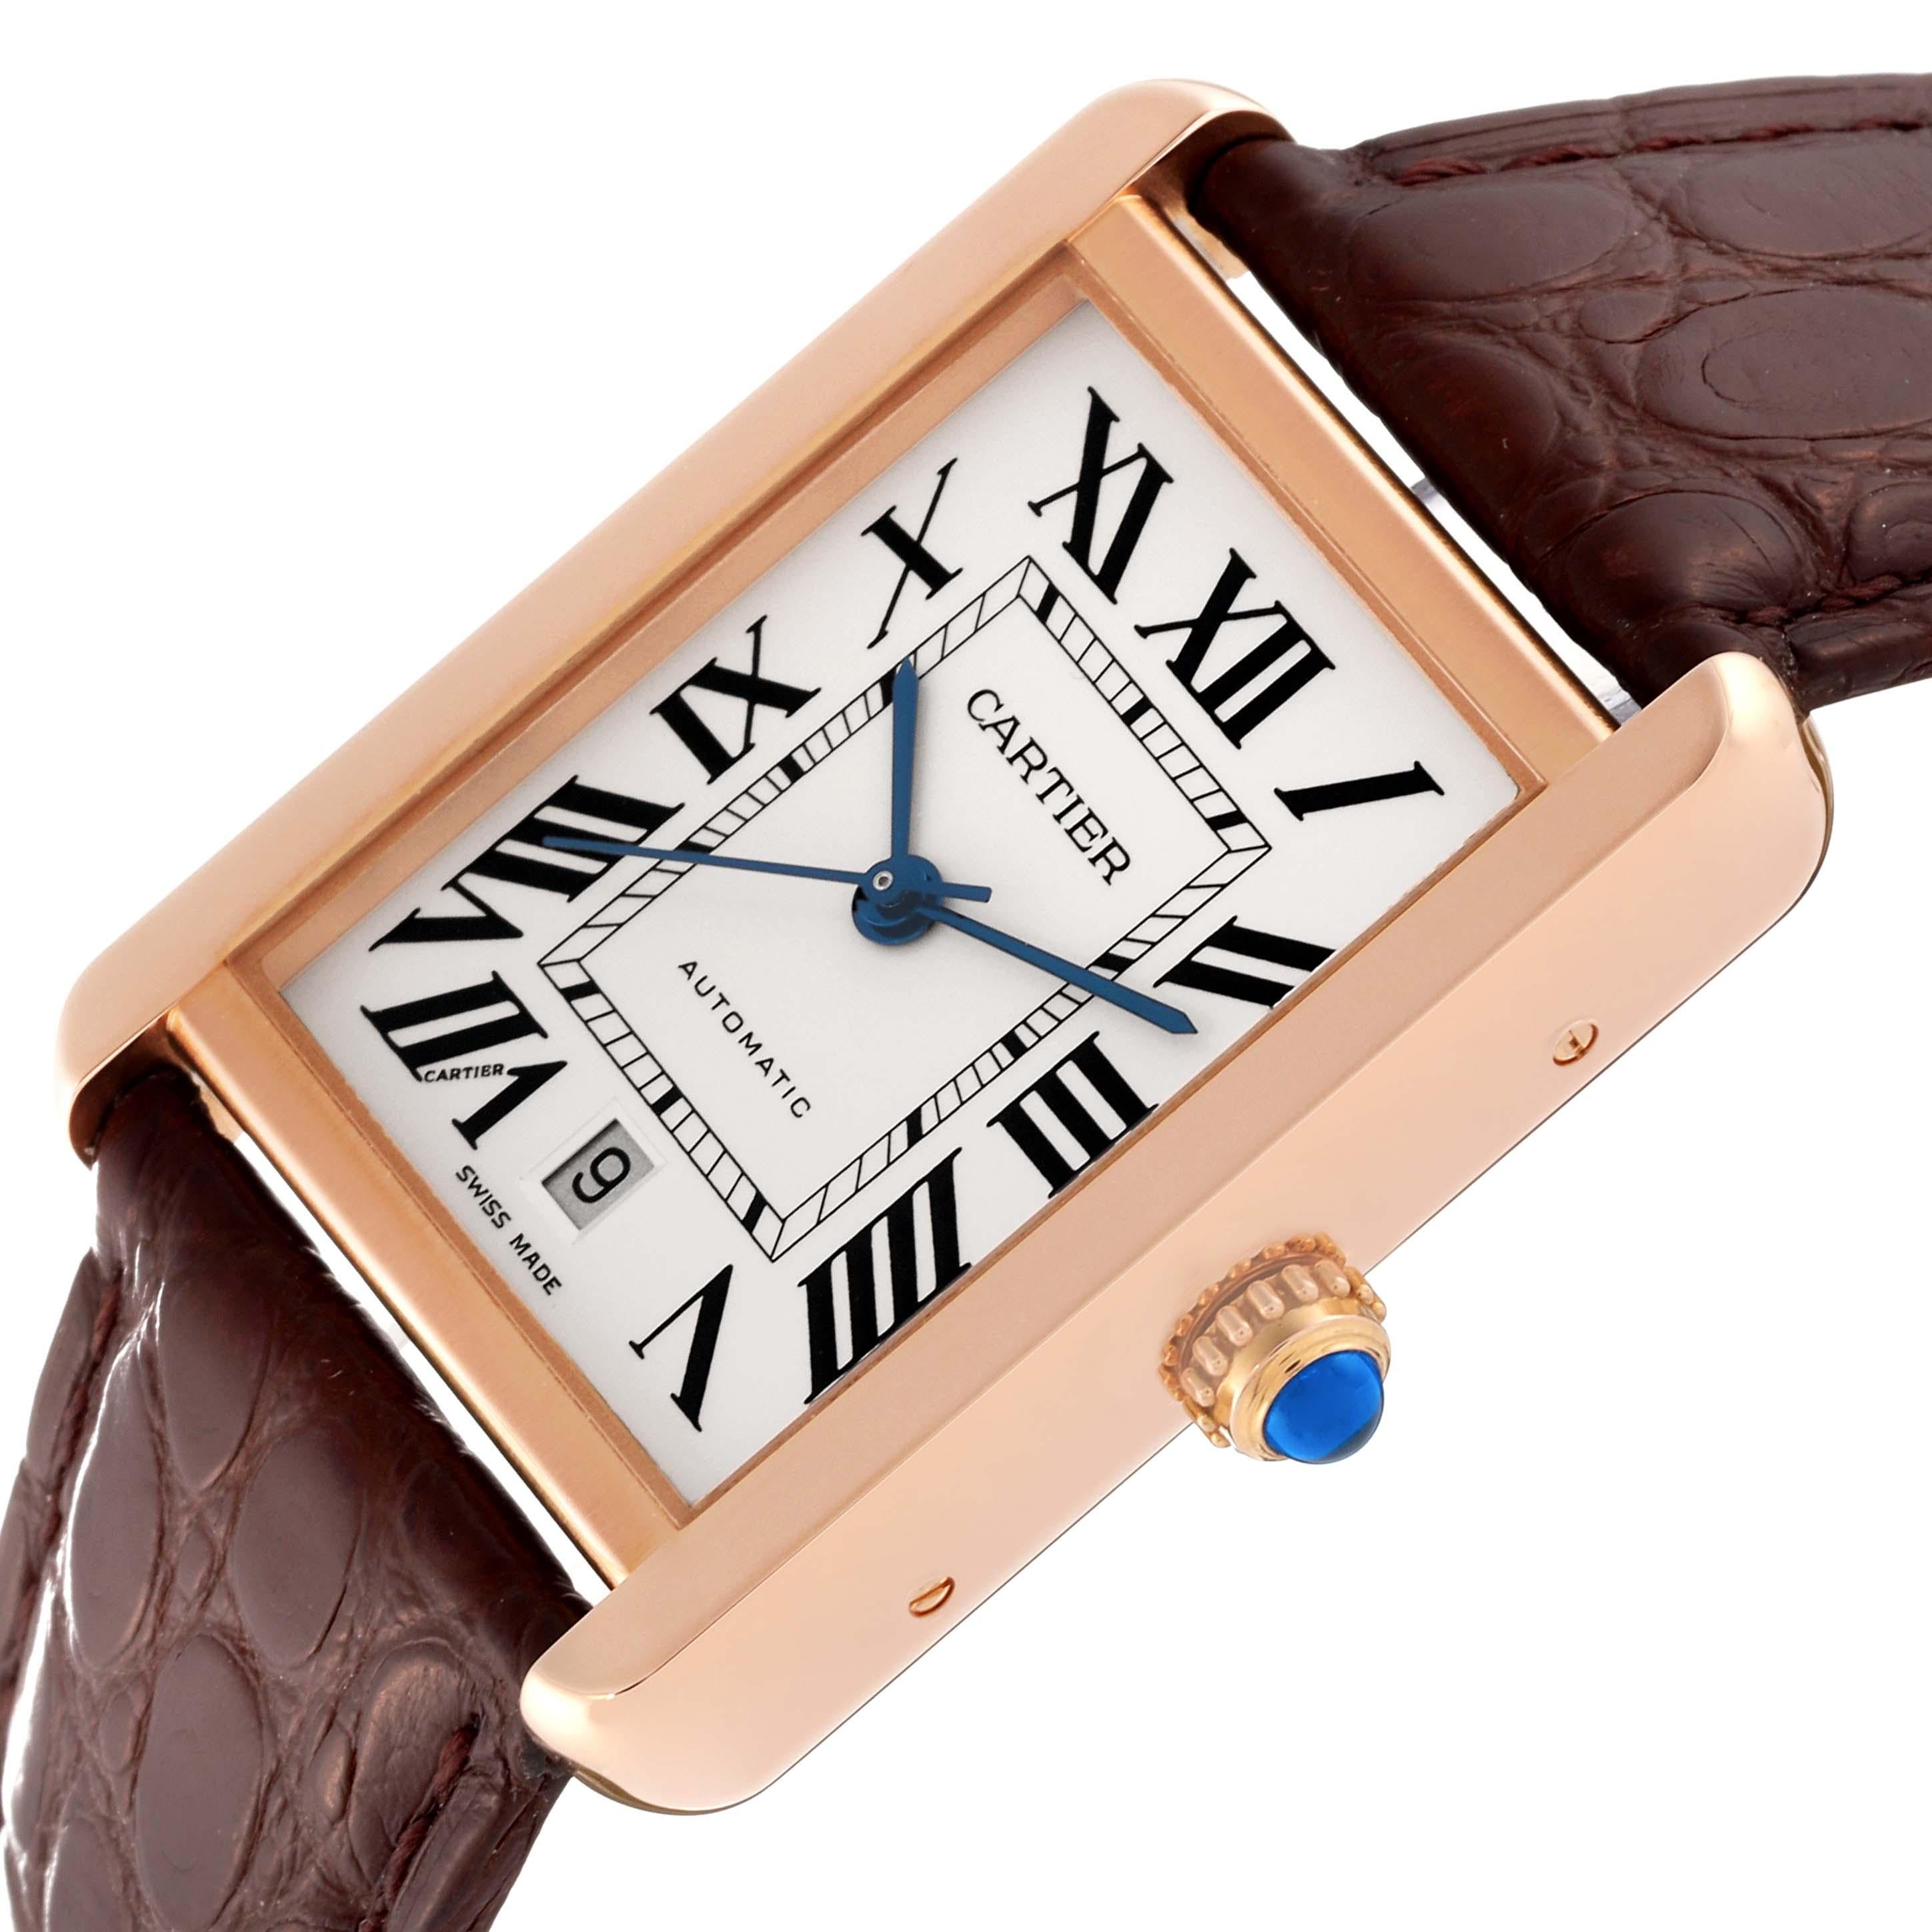 Cartier Tank Solo XL Rose Gold Steel Silver Dial Mens Watch W5200026 Card. Automatic self-winding movement. 18K rose gold case 31 mm x 41 mm. Stainless steel case back. Circular grained crown set with a blue spinel cabochon. . Scratch resistant